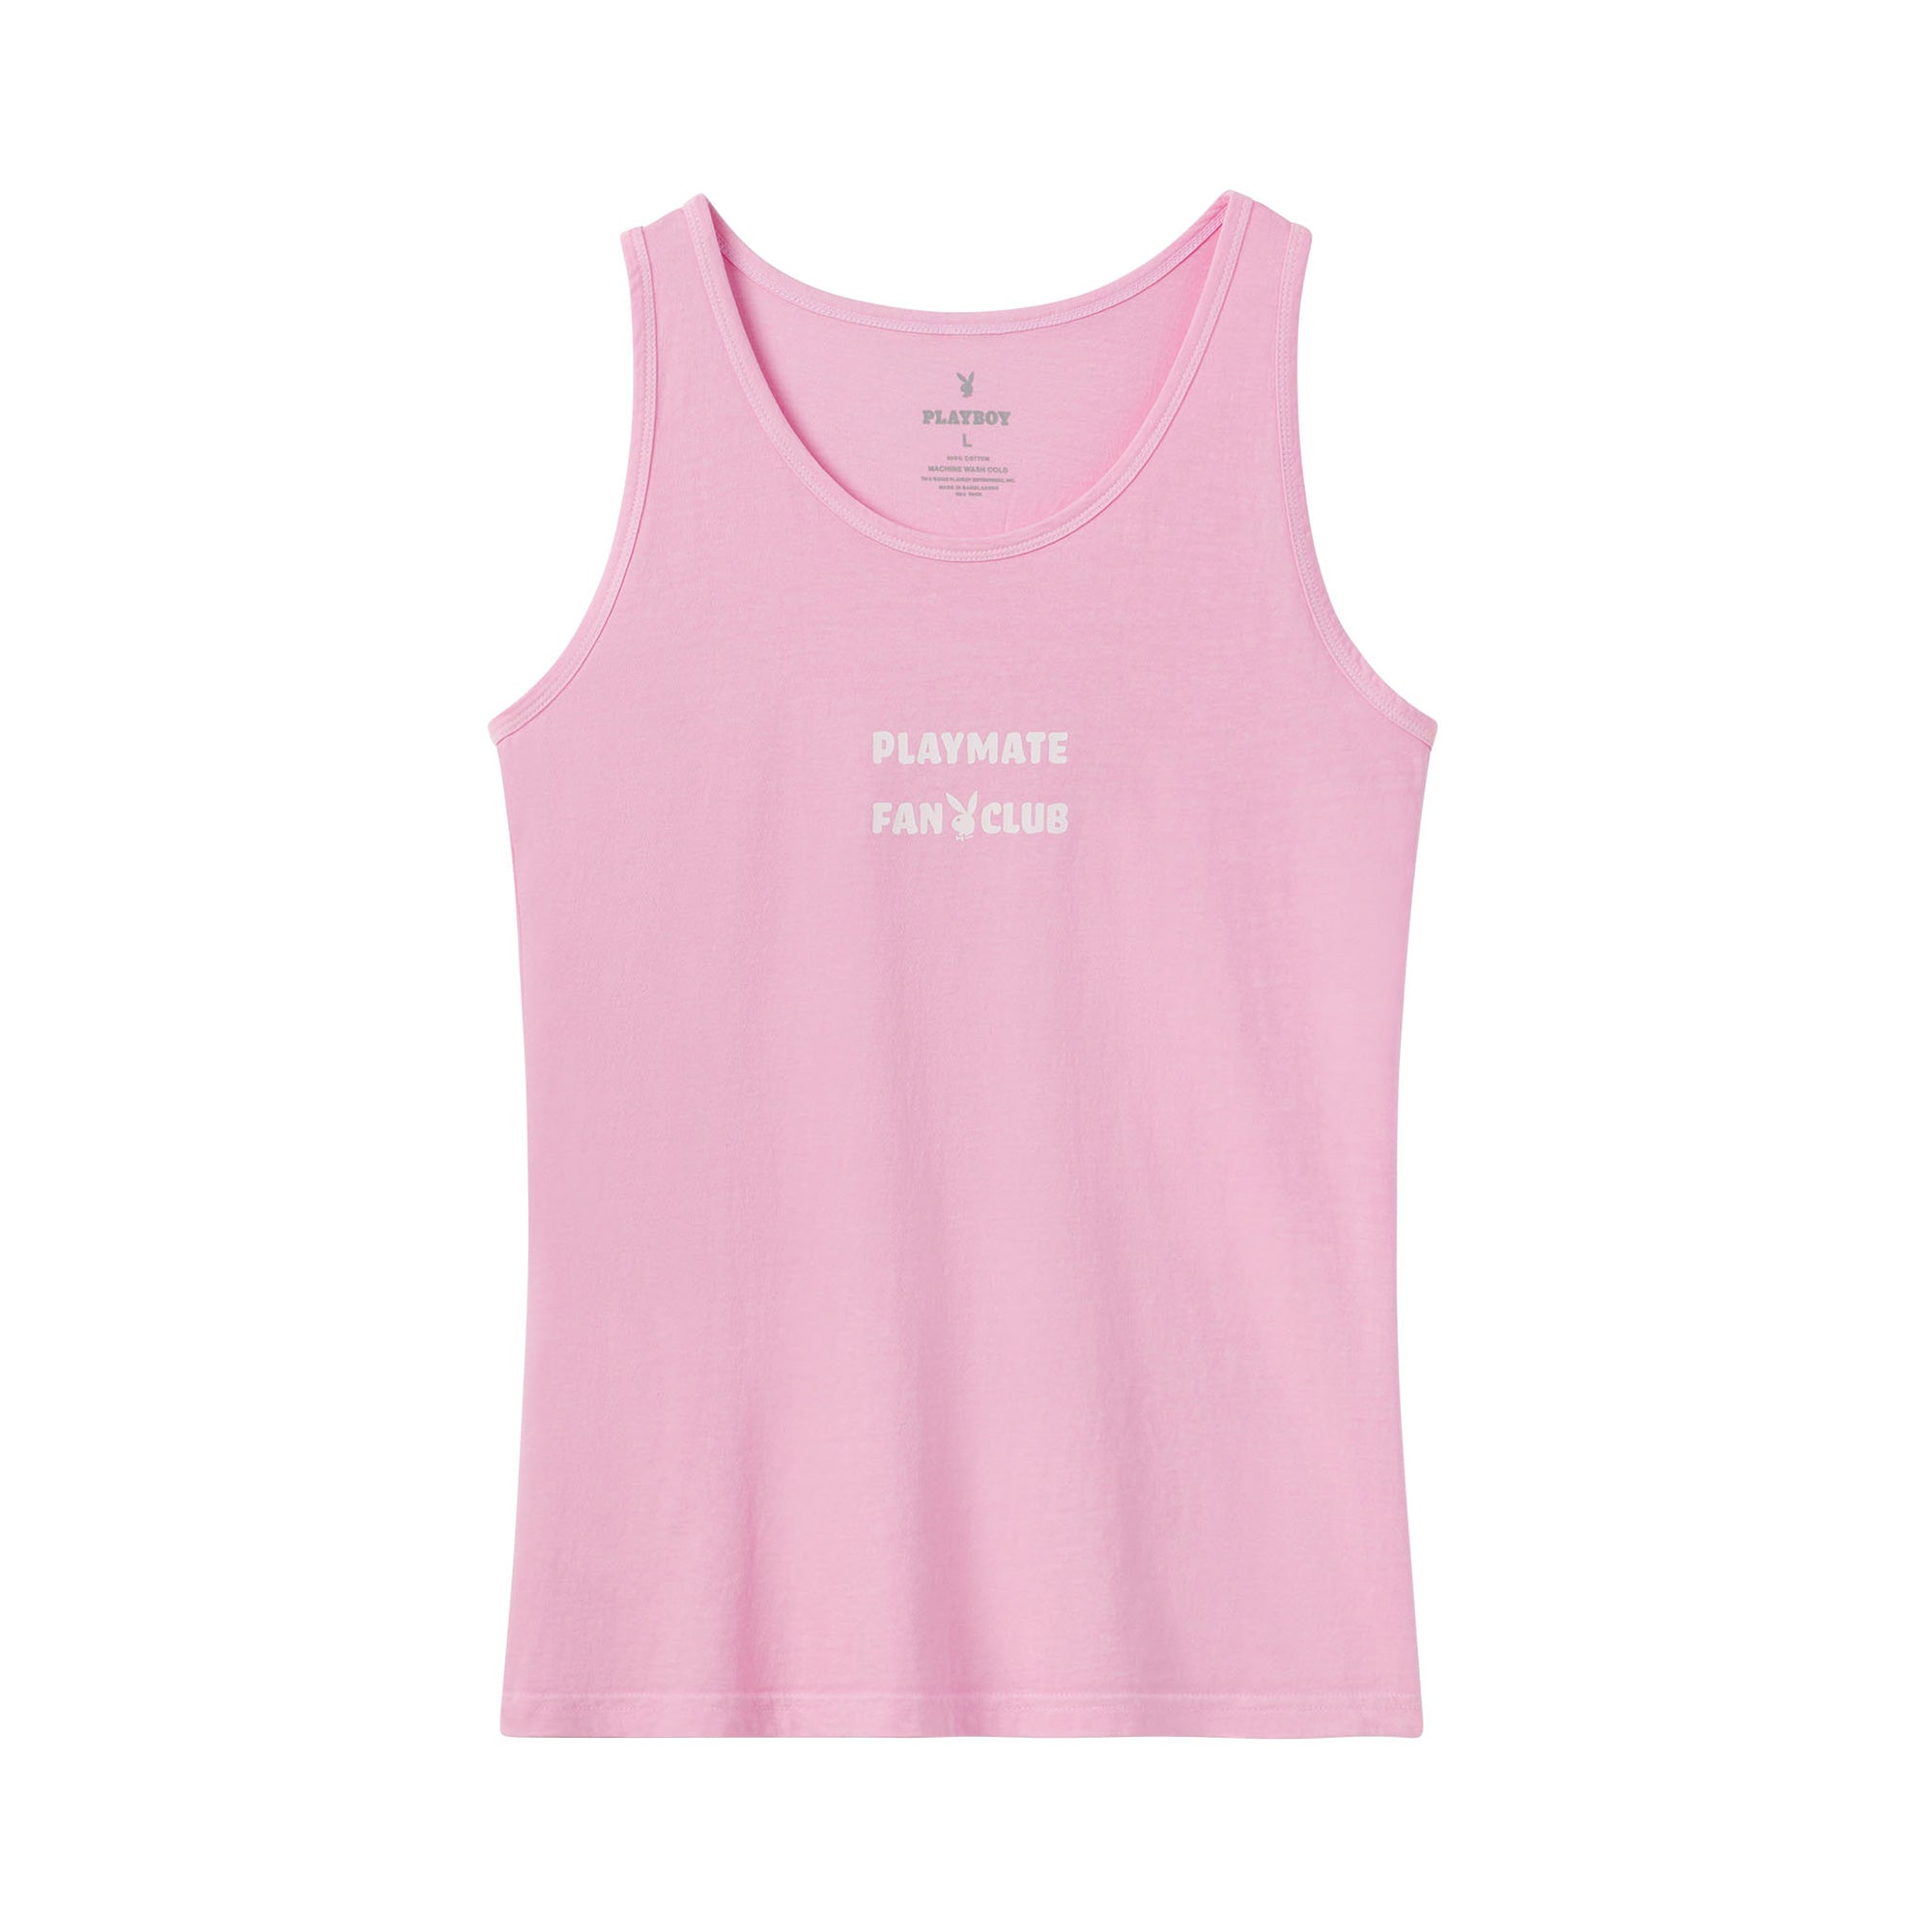 Playmate of the Year Tank - Pink / White Print